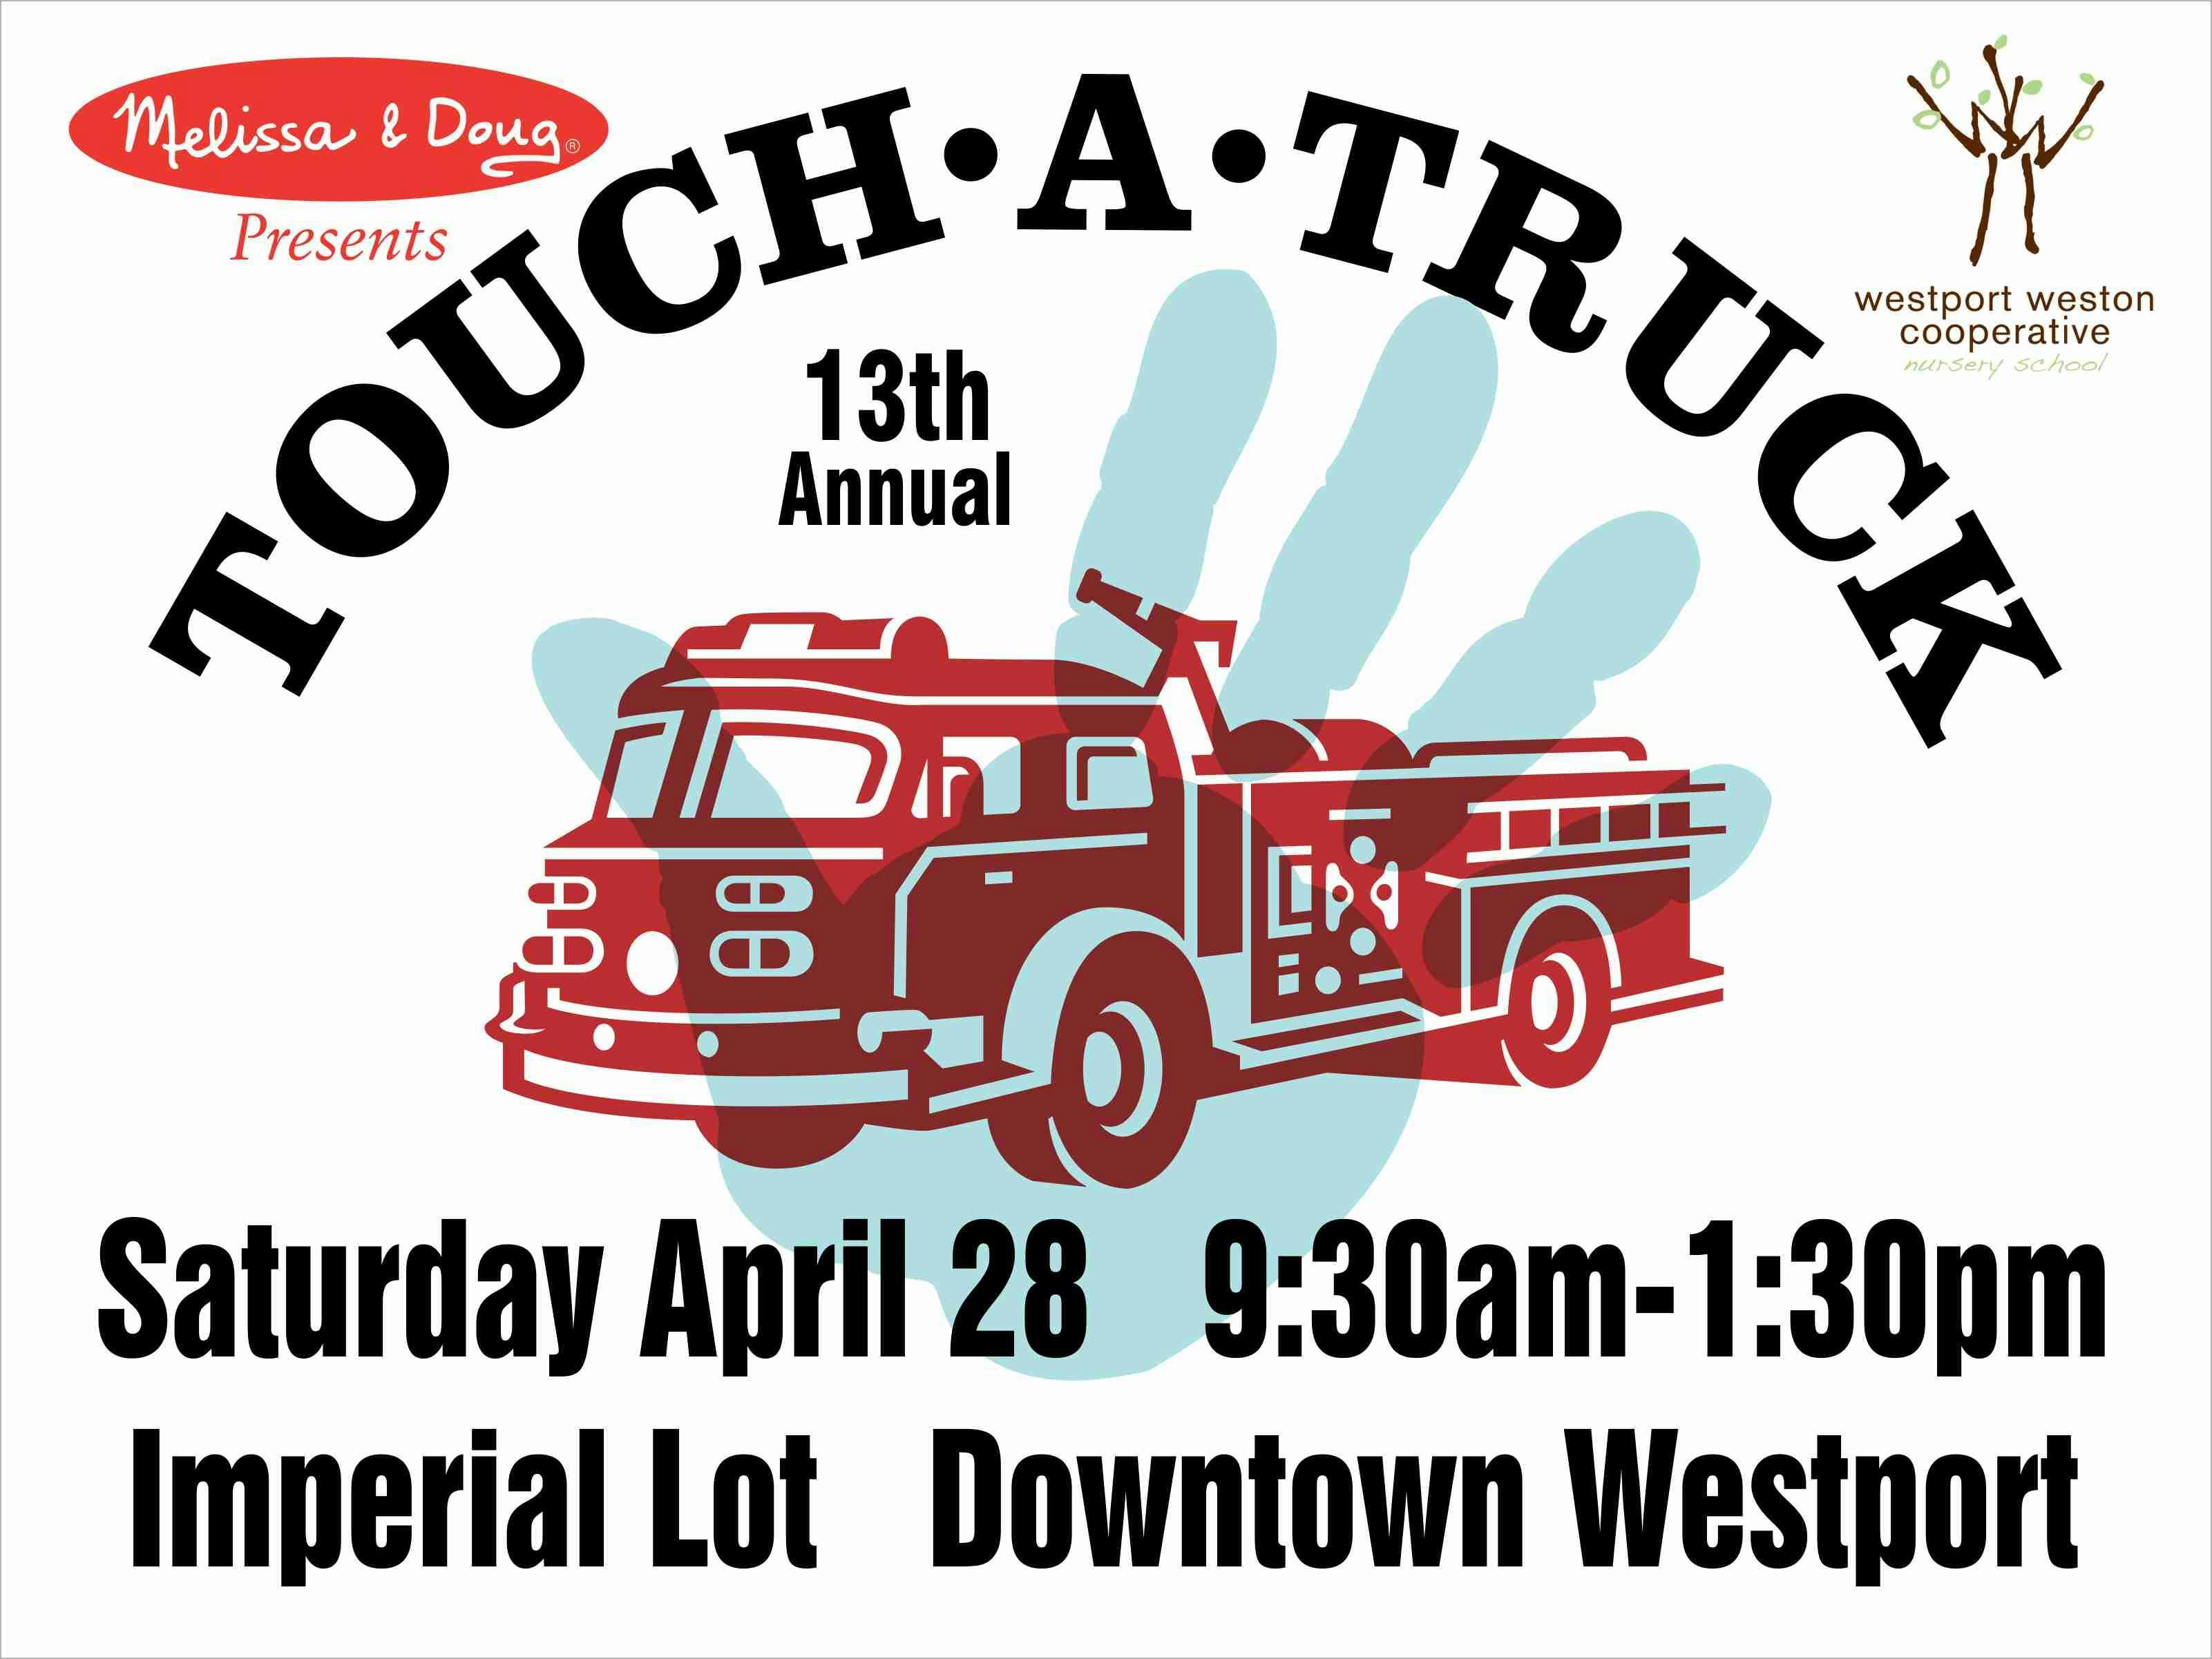 Melissa & Doug presents 13th Annual Co-op Touch-A-Truck